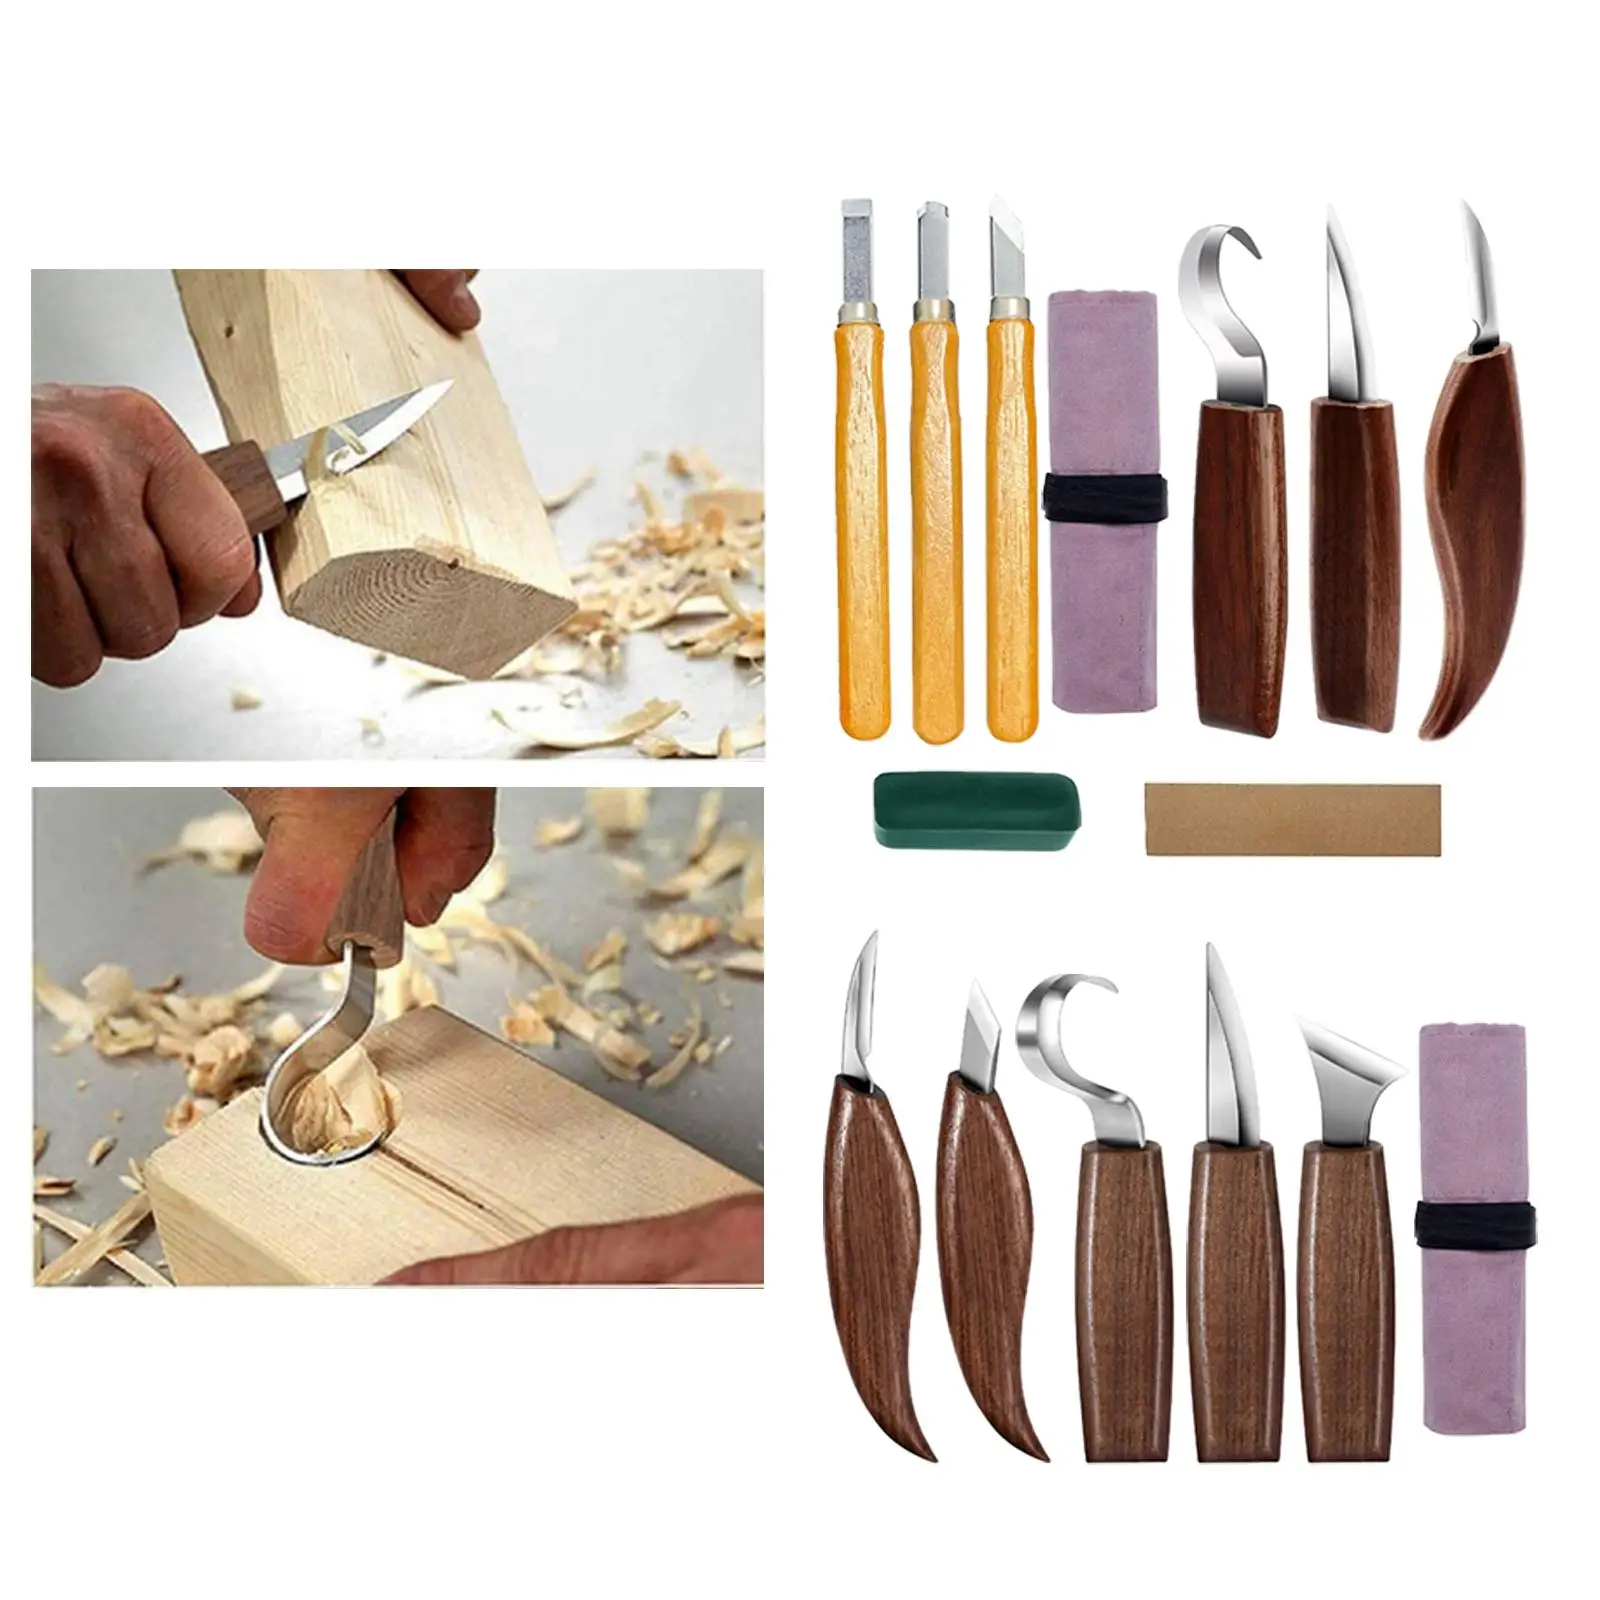  Carving Tools Set Woodworking Detail Cutter Hand Tool Beginners